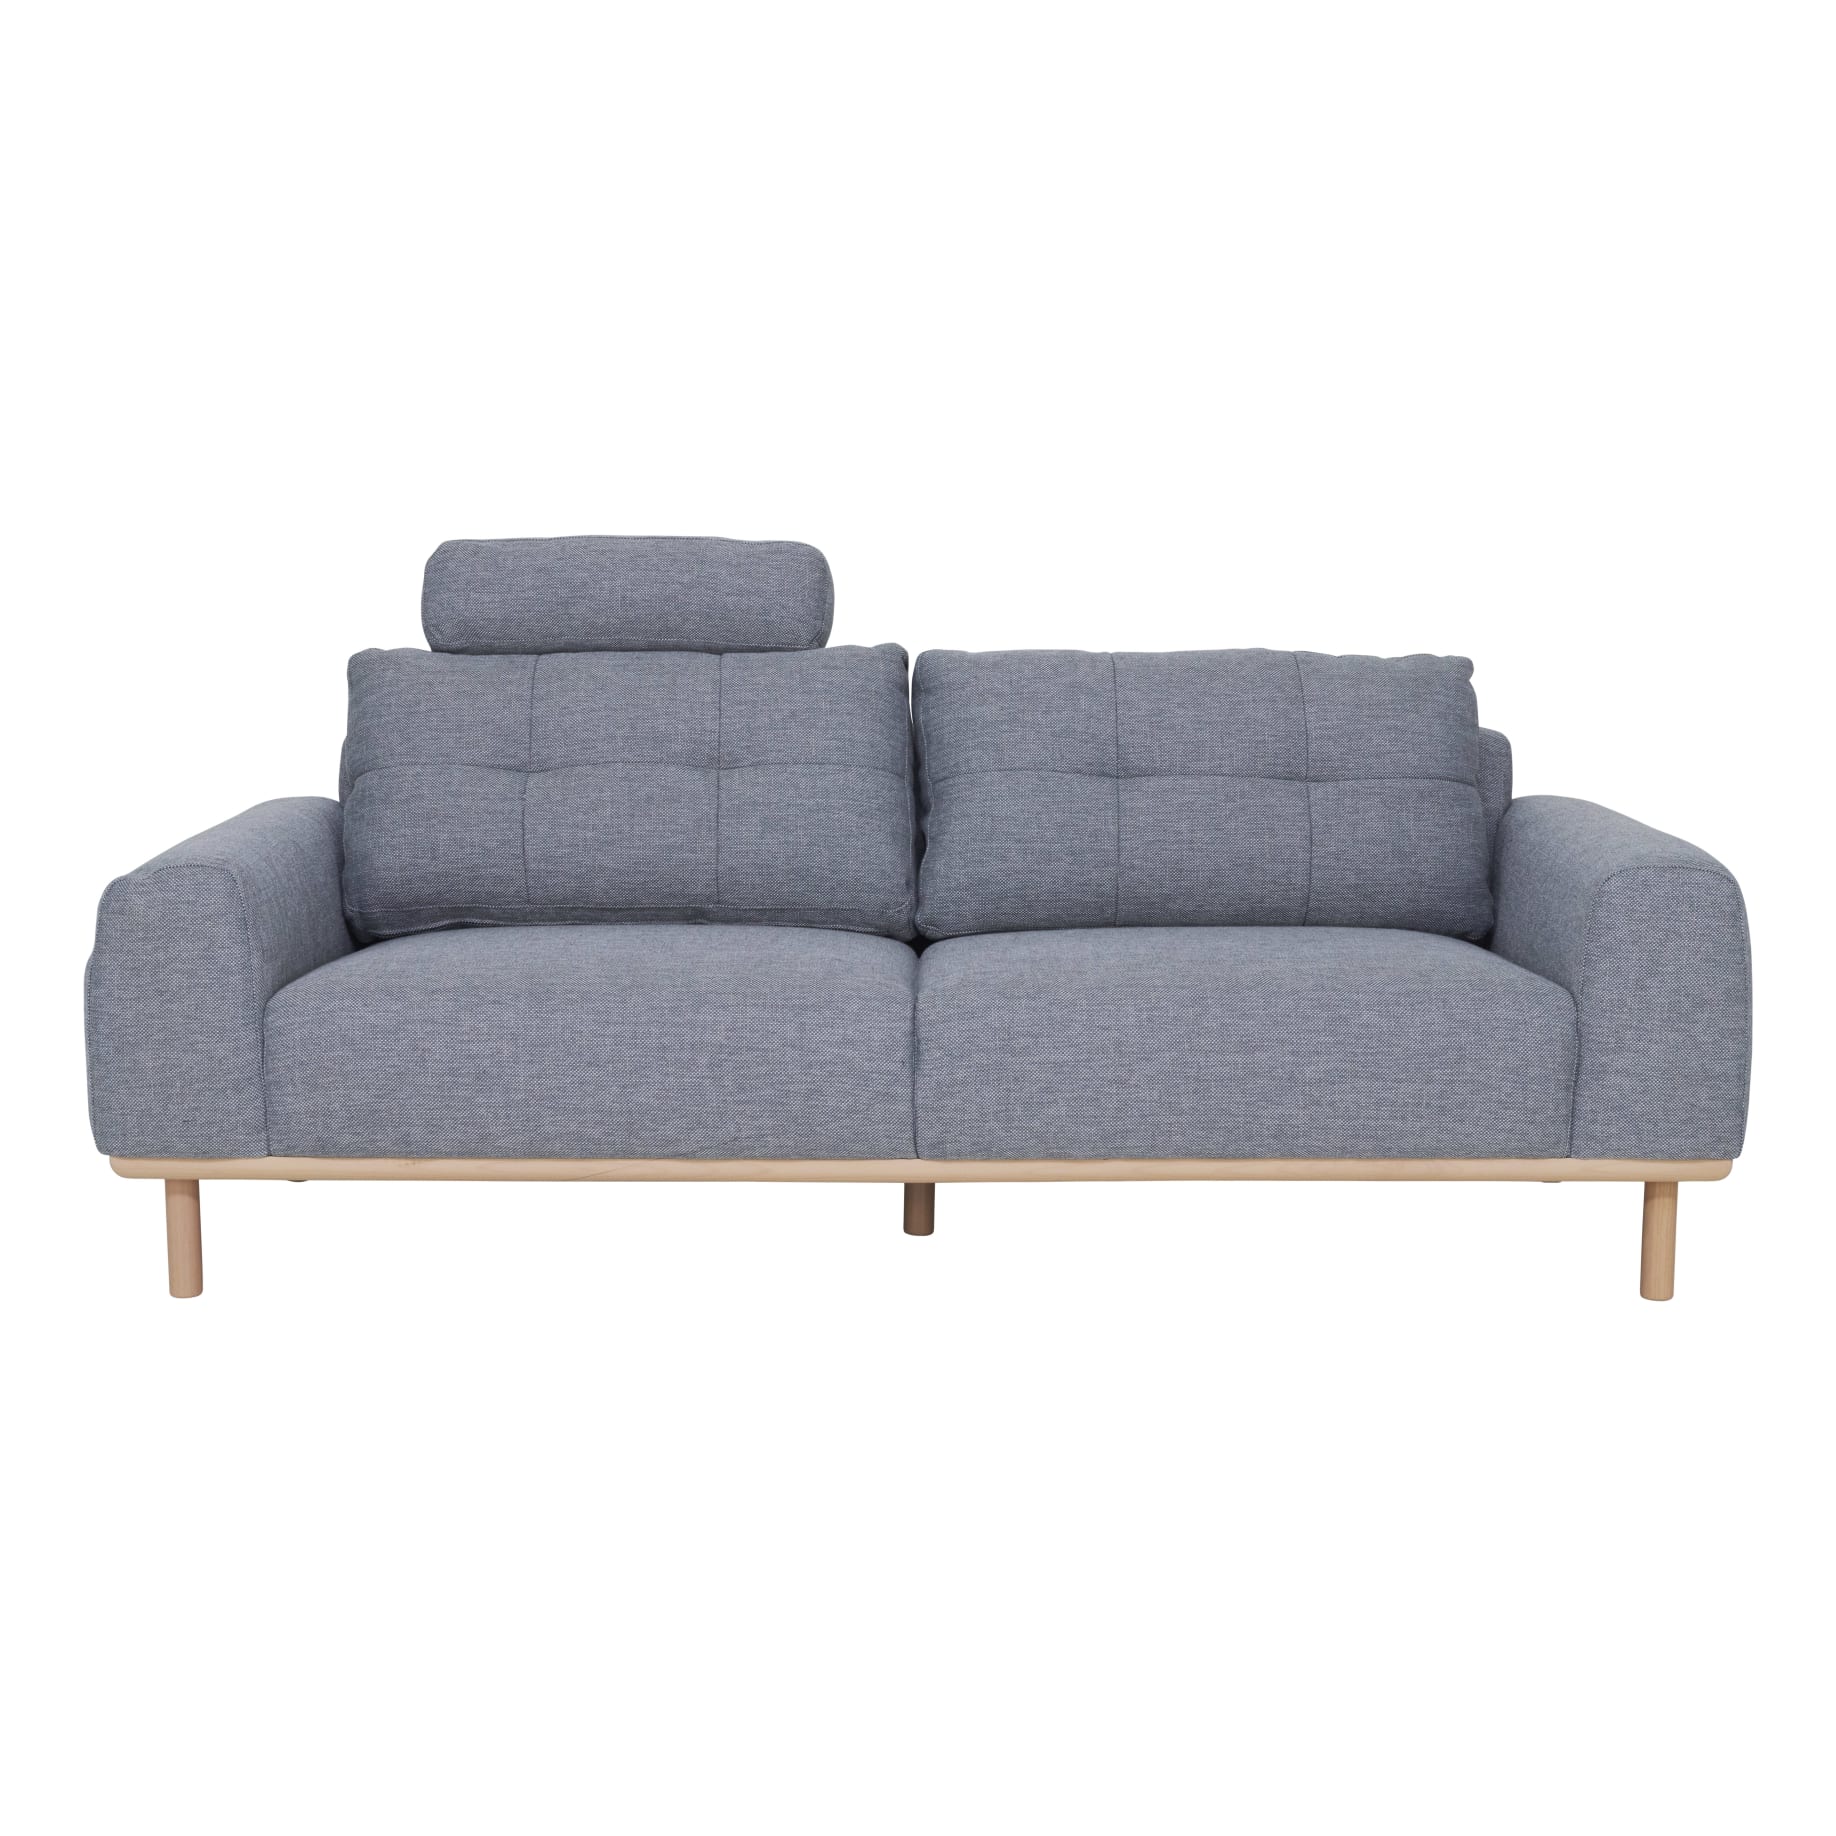 Stratton 3 Seater Sofa in Cloud Pewter